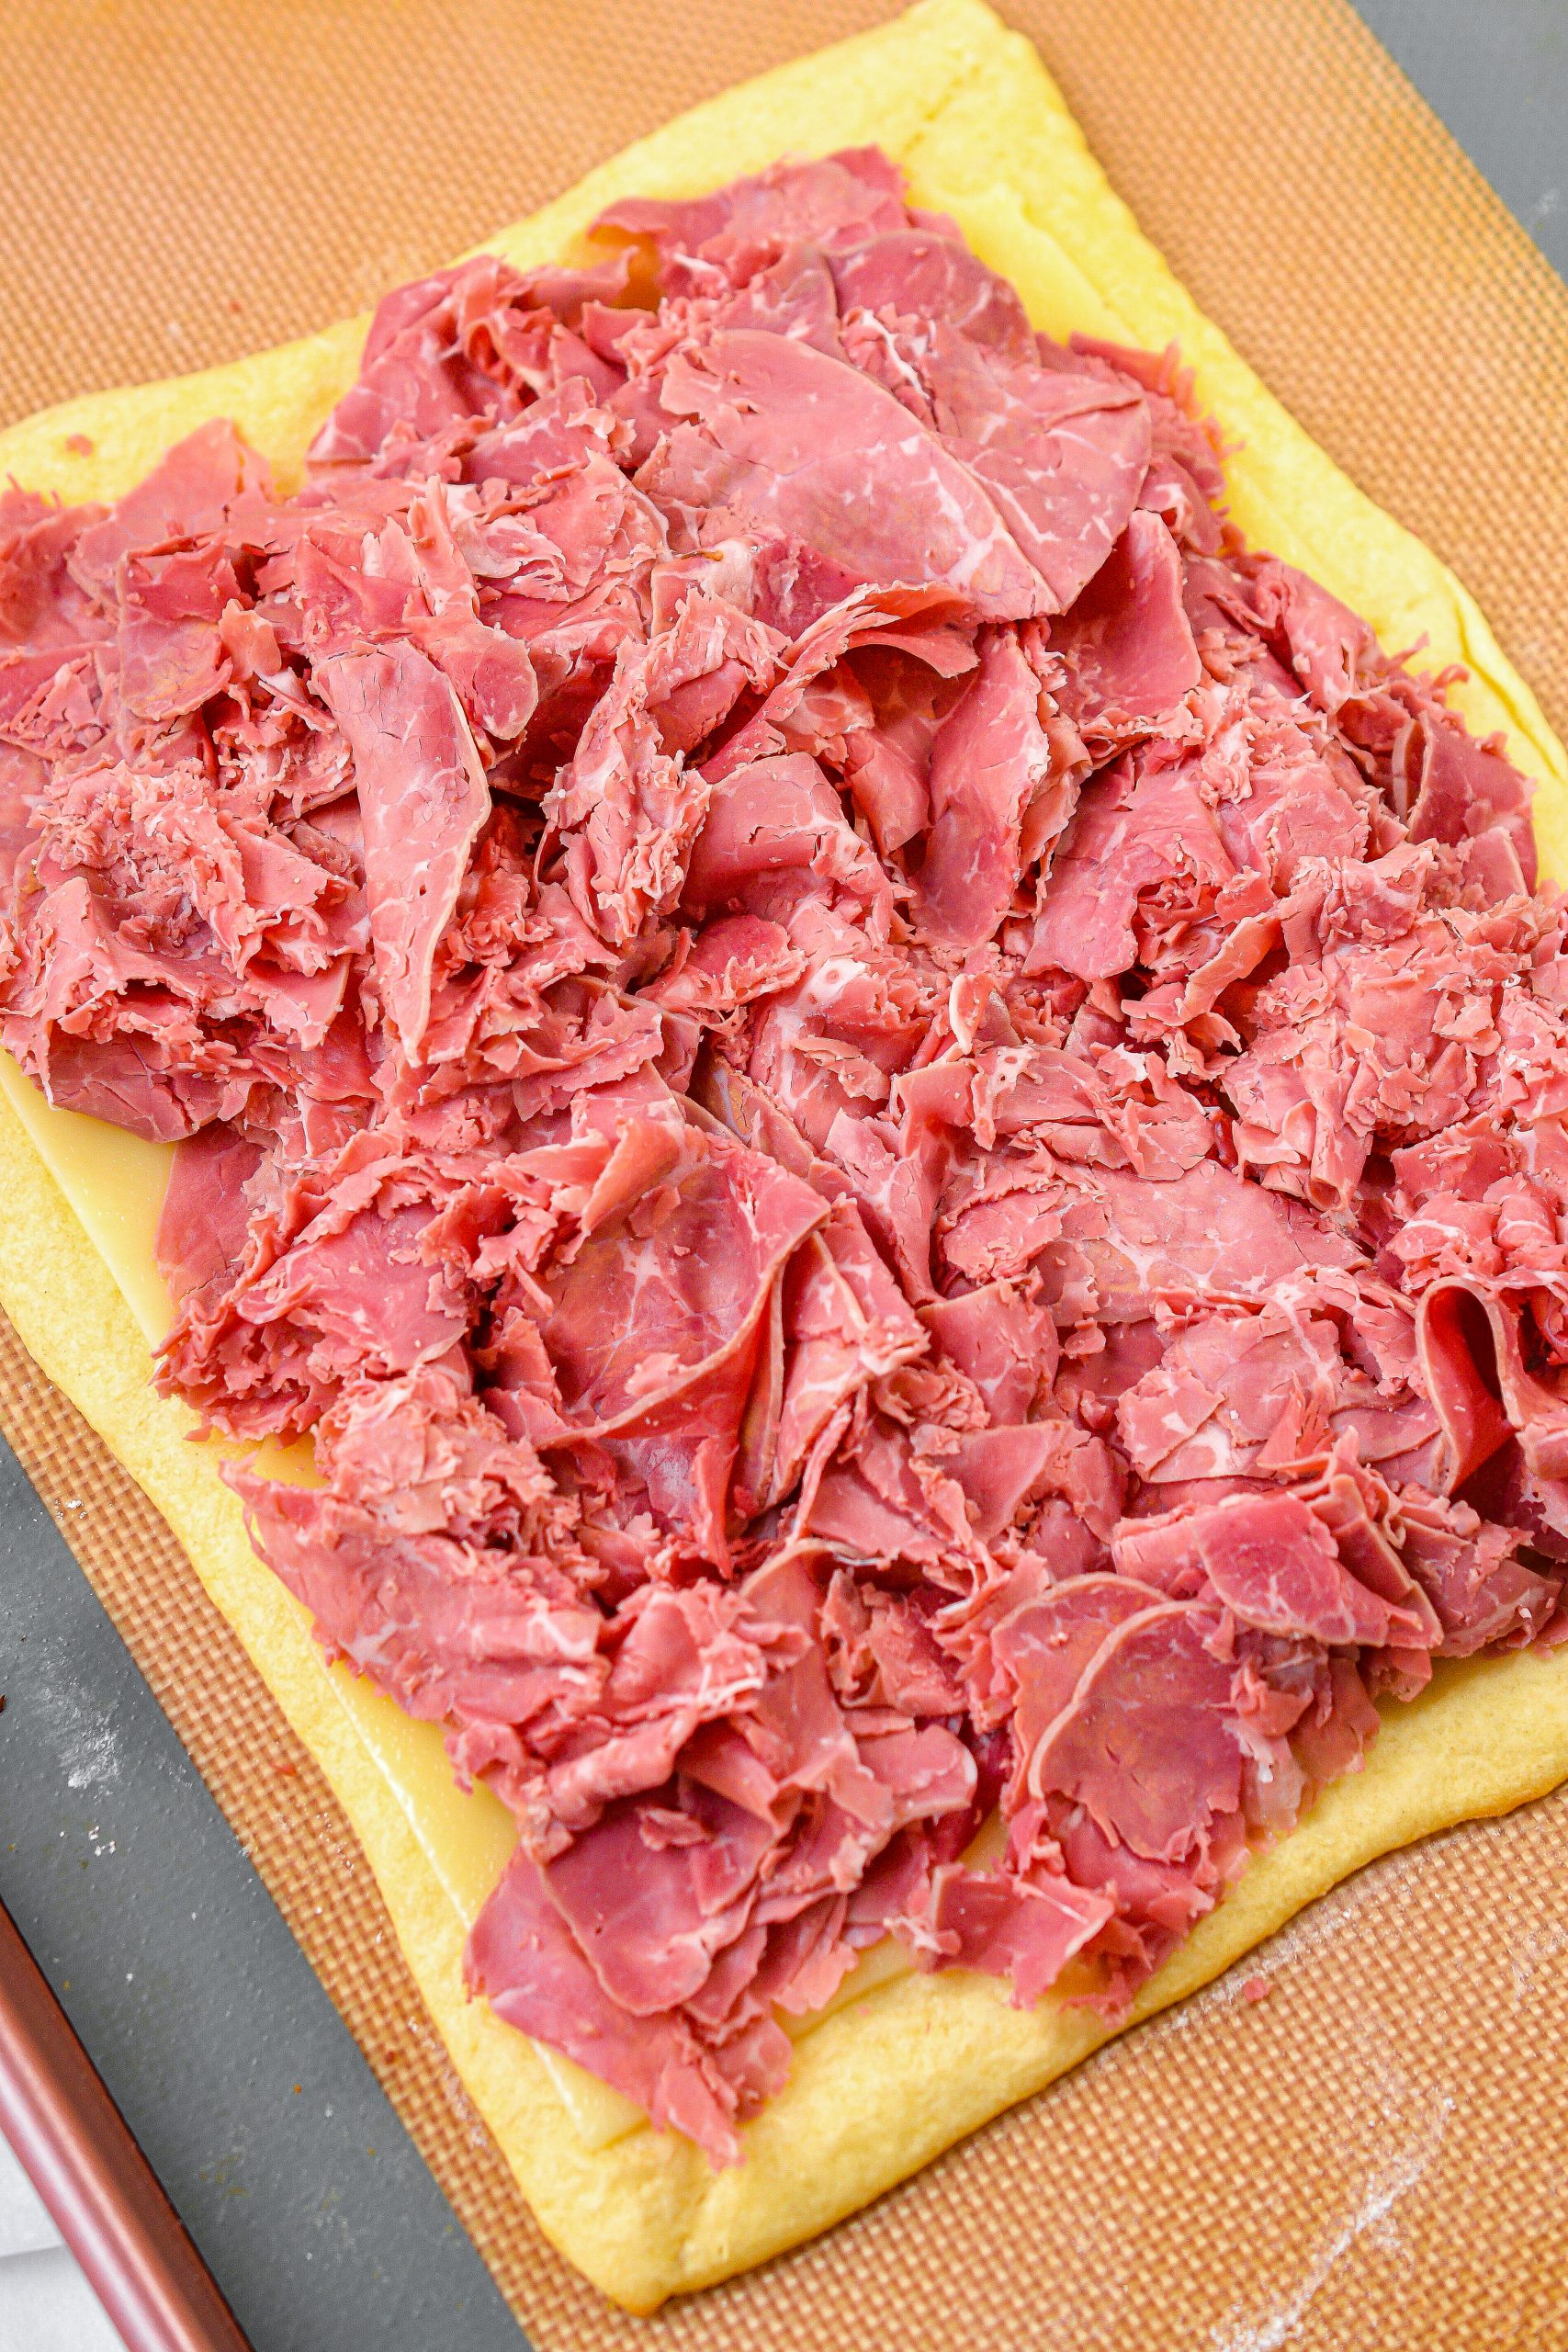 Step 7. Place the corned beef on top of the swiss cheese.